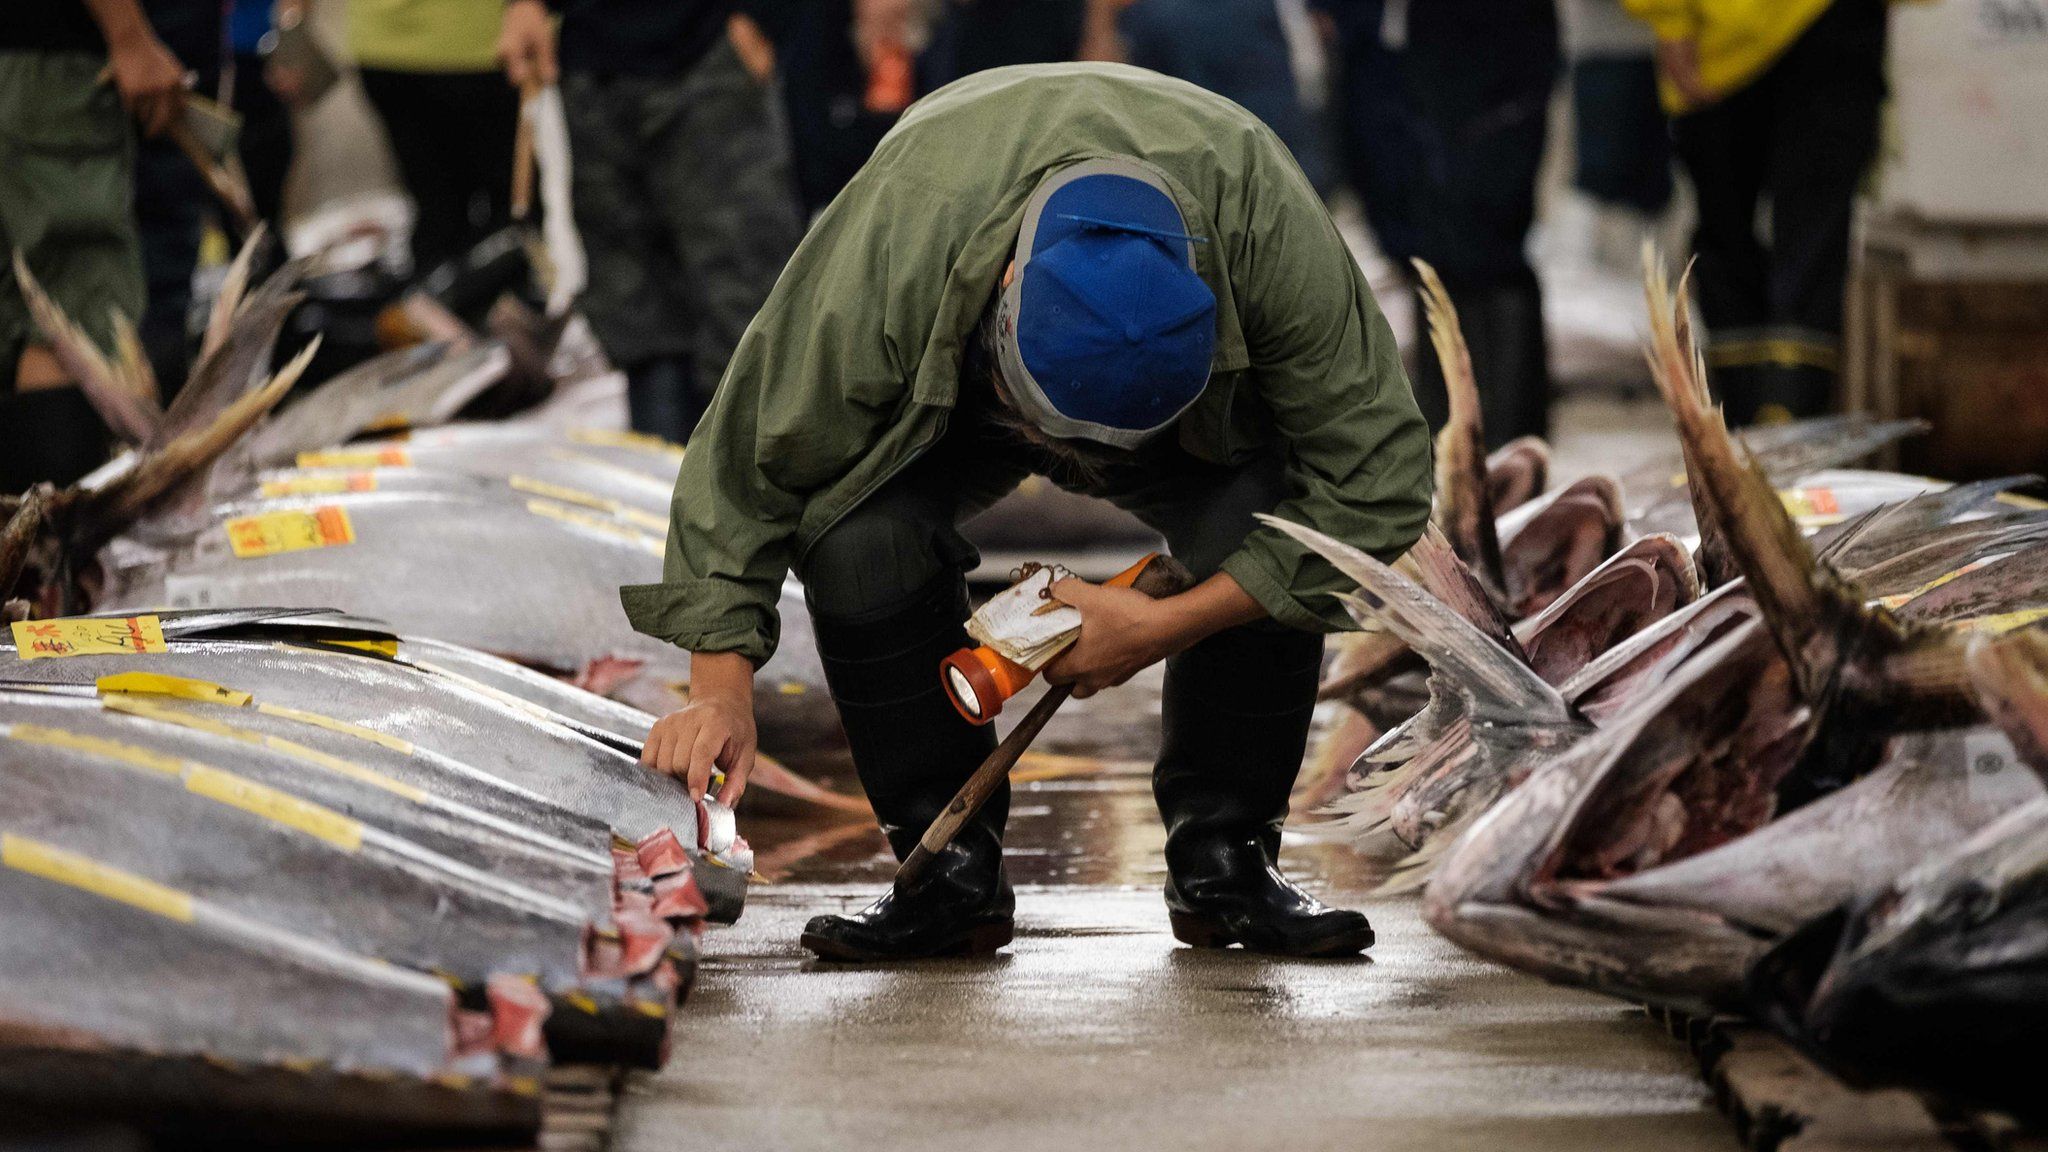 A buyer inspects fish before the final tuna auction at the landmark Tsukiji fish market in Tokyo on October 6, 2018